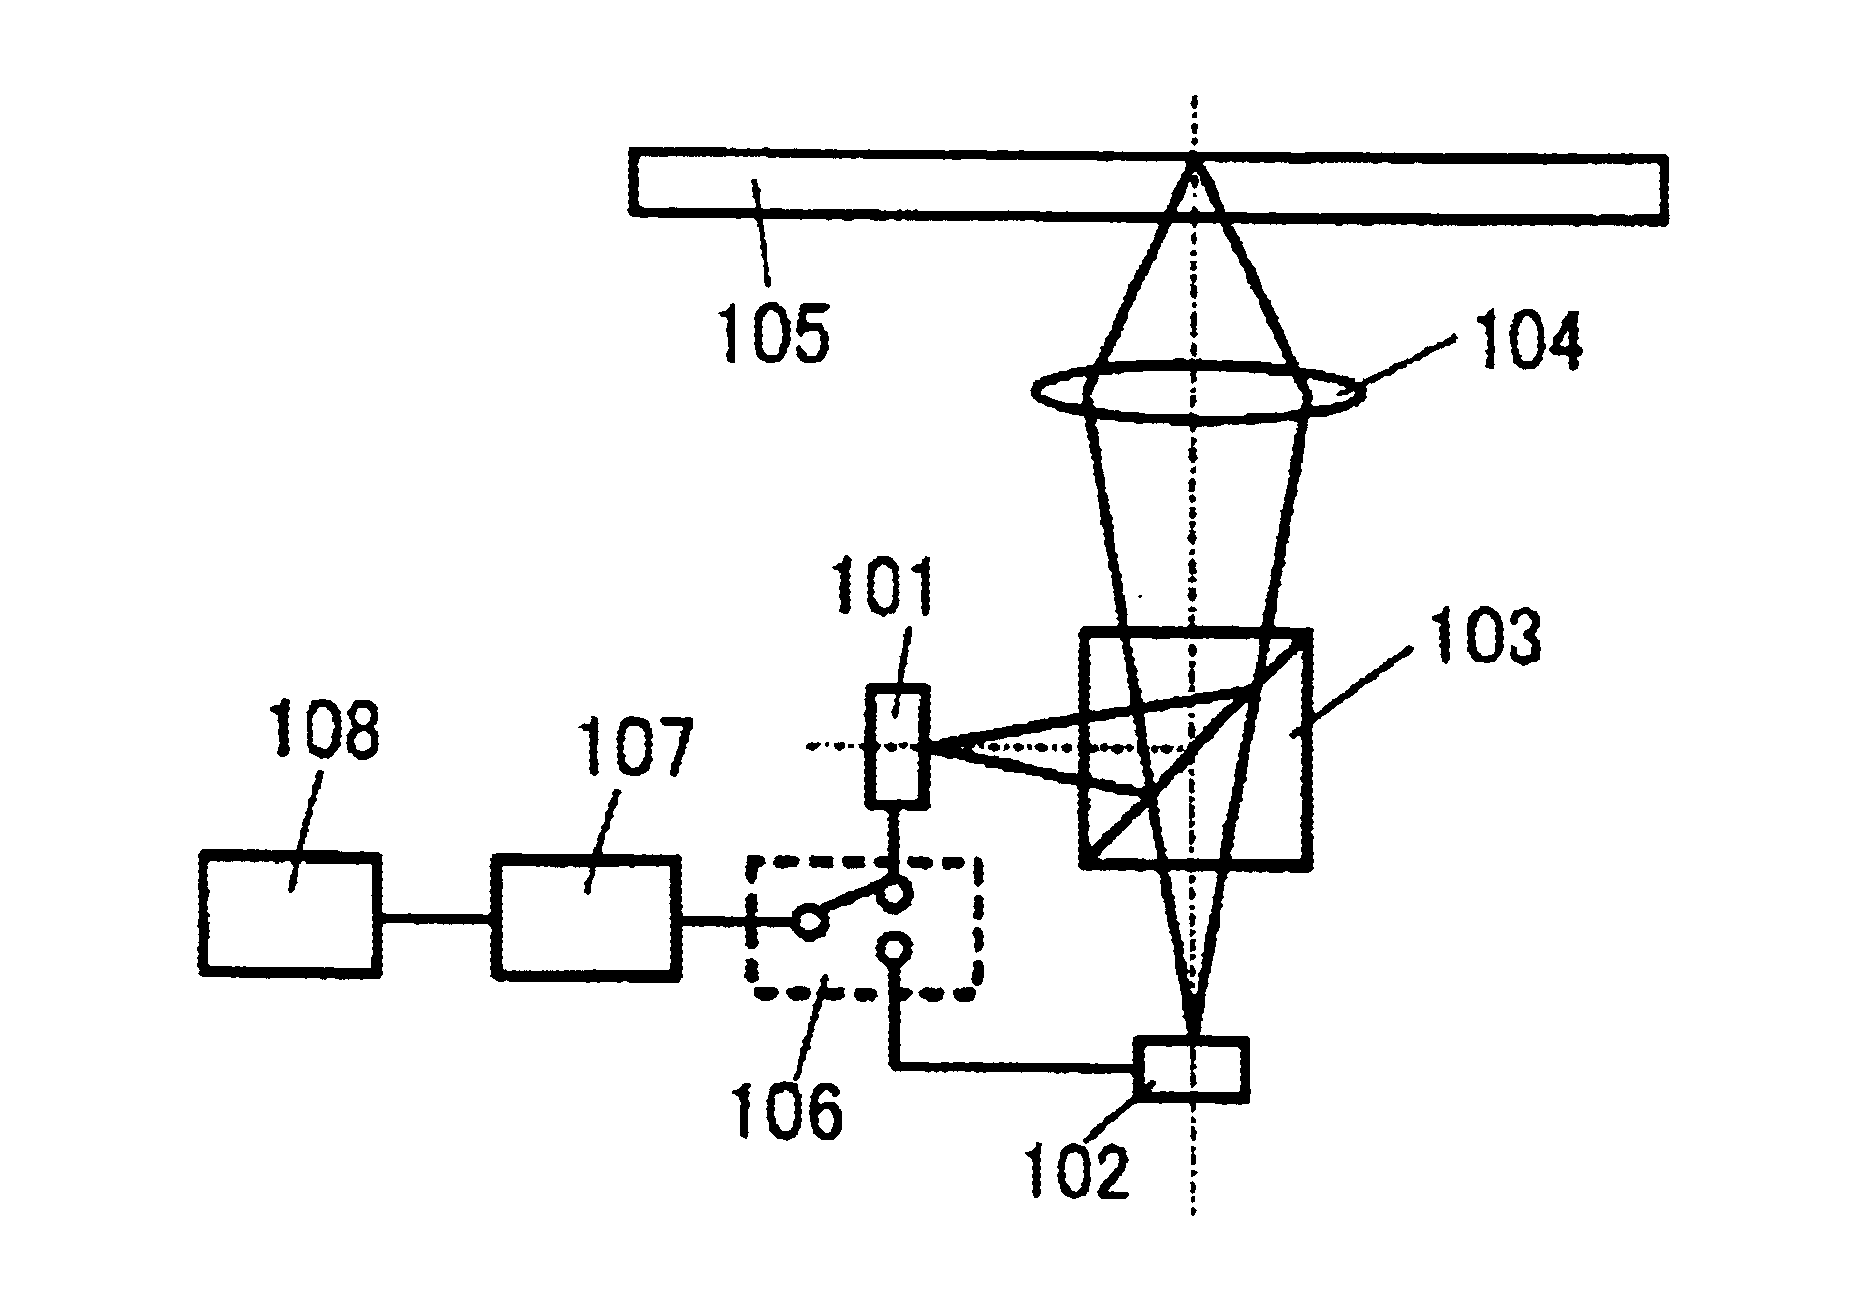 Optical device for recording and reproducing information